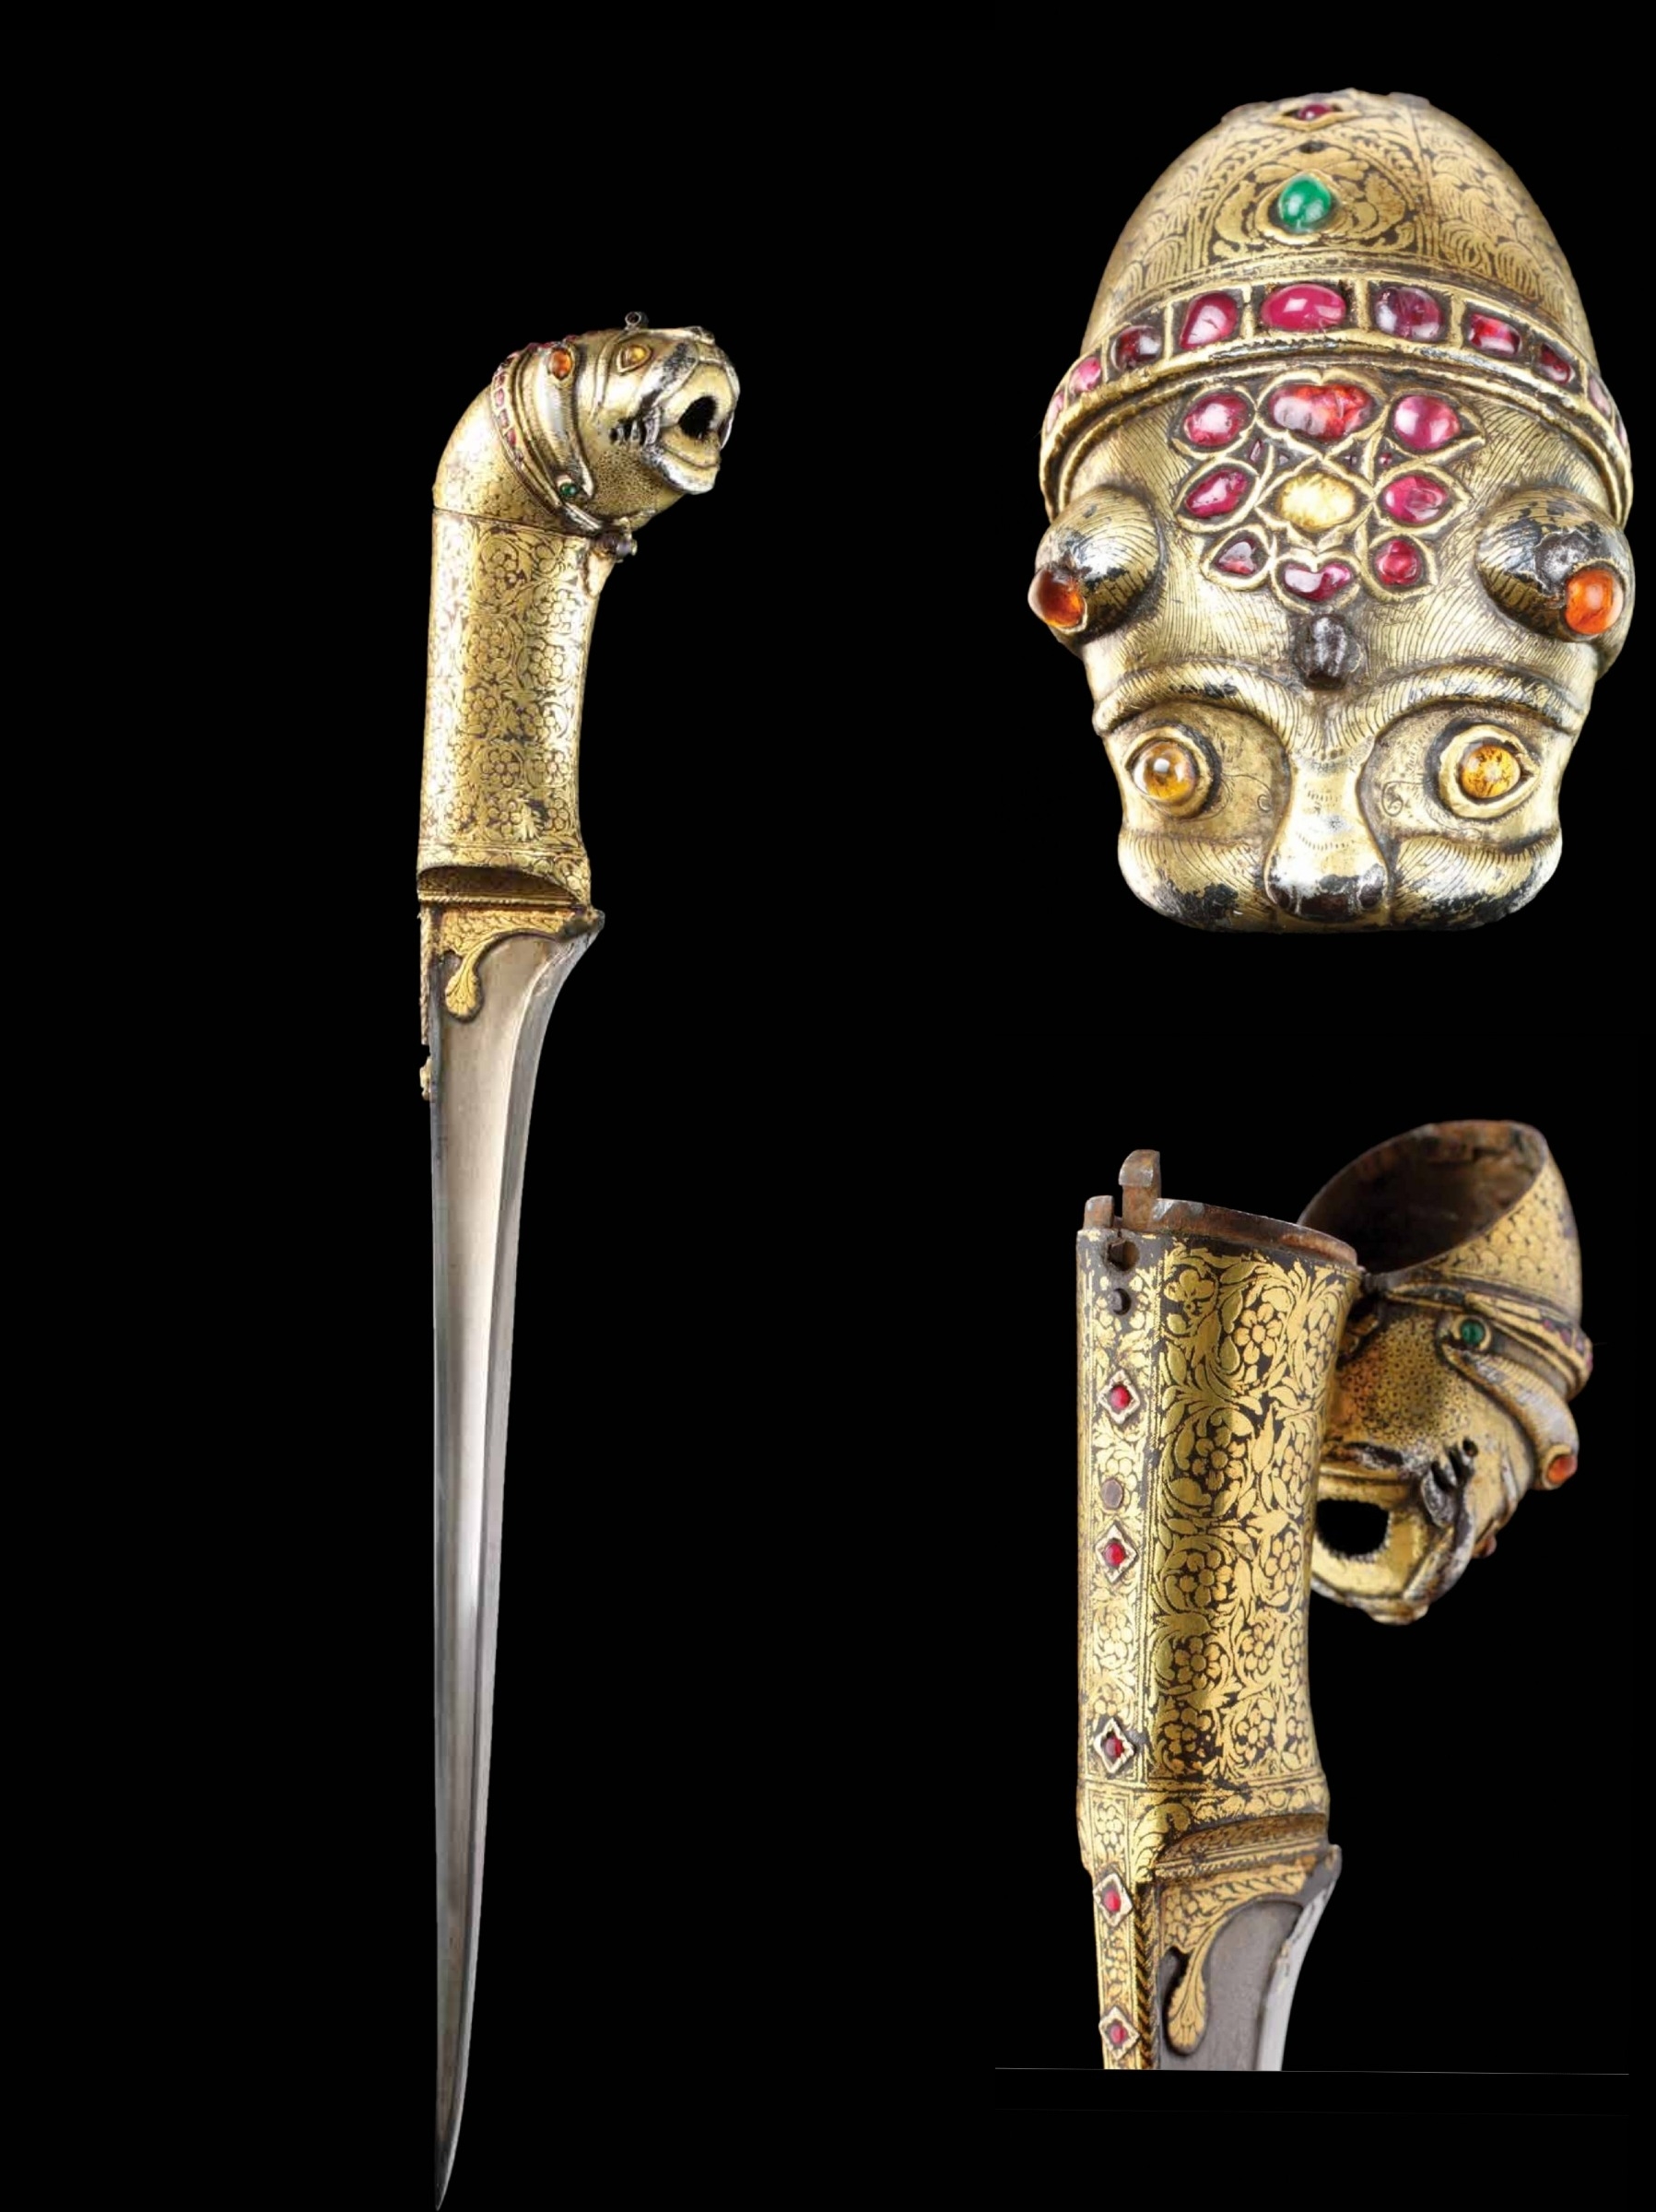 Peshkqbz dagger, 18th Century, Rajasthan, India. Made of Damascus steel and damascened in gold, studded with emerald, citrines and rubies.jpg